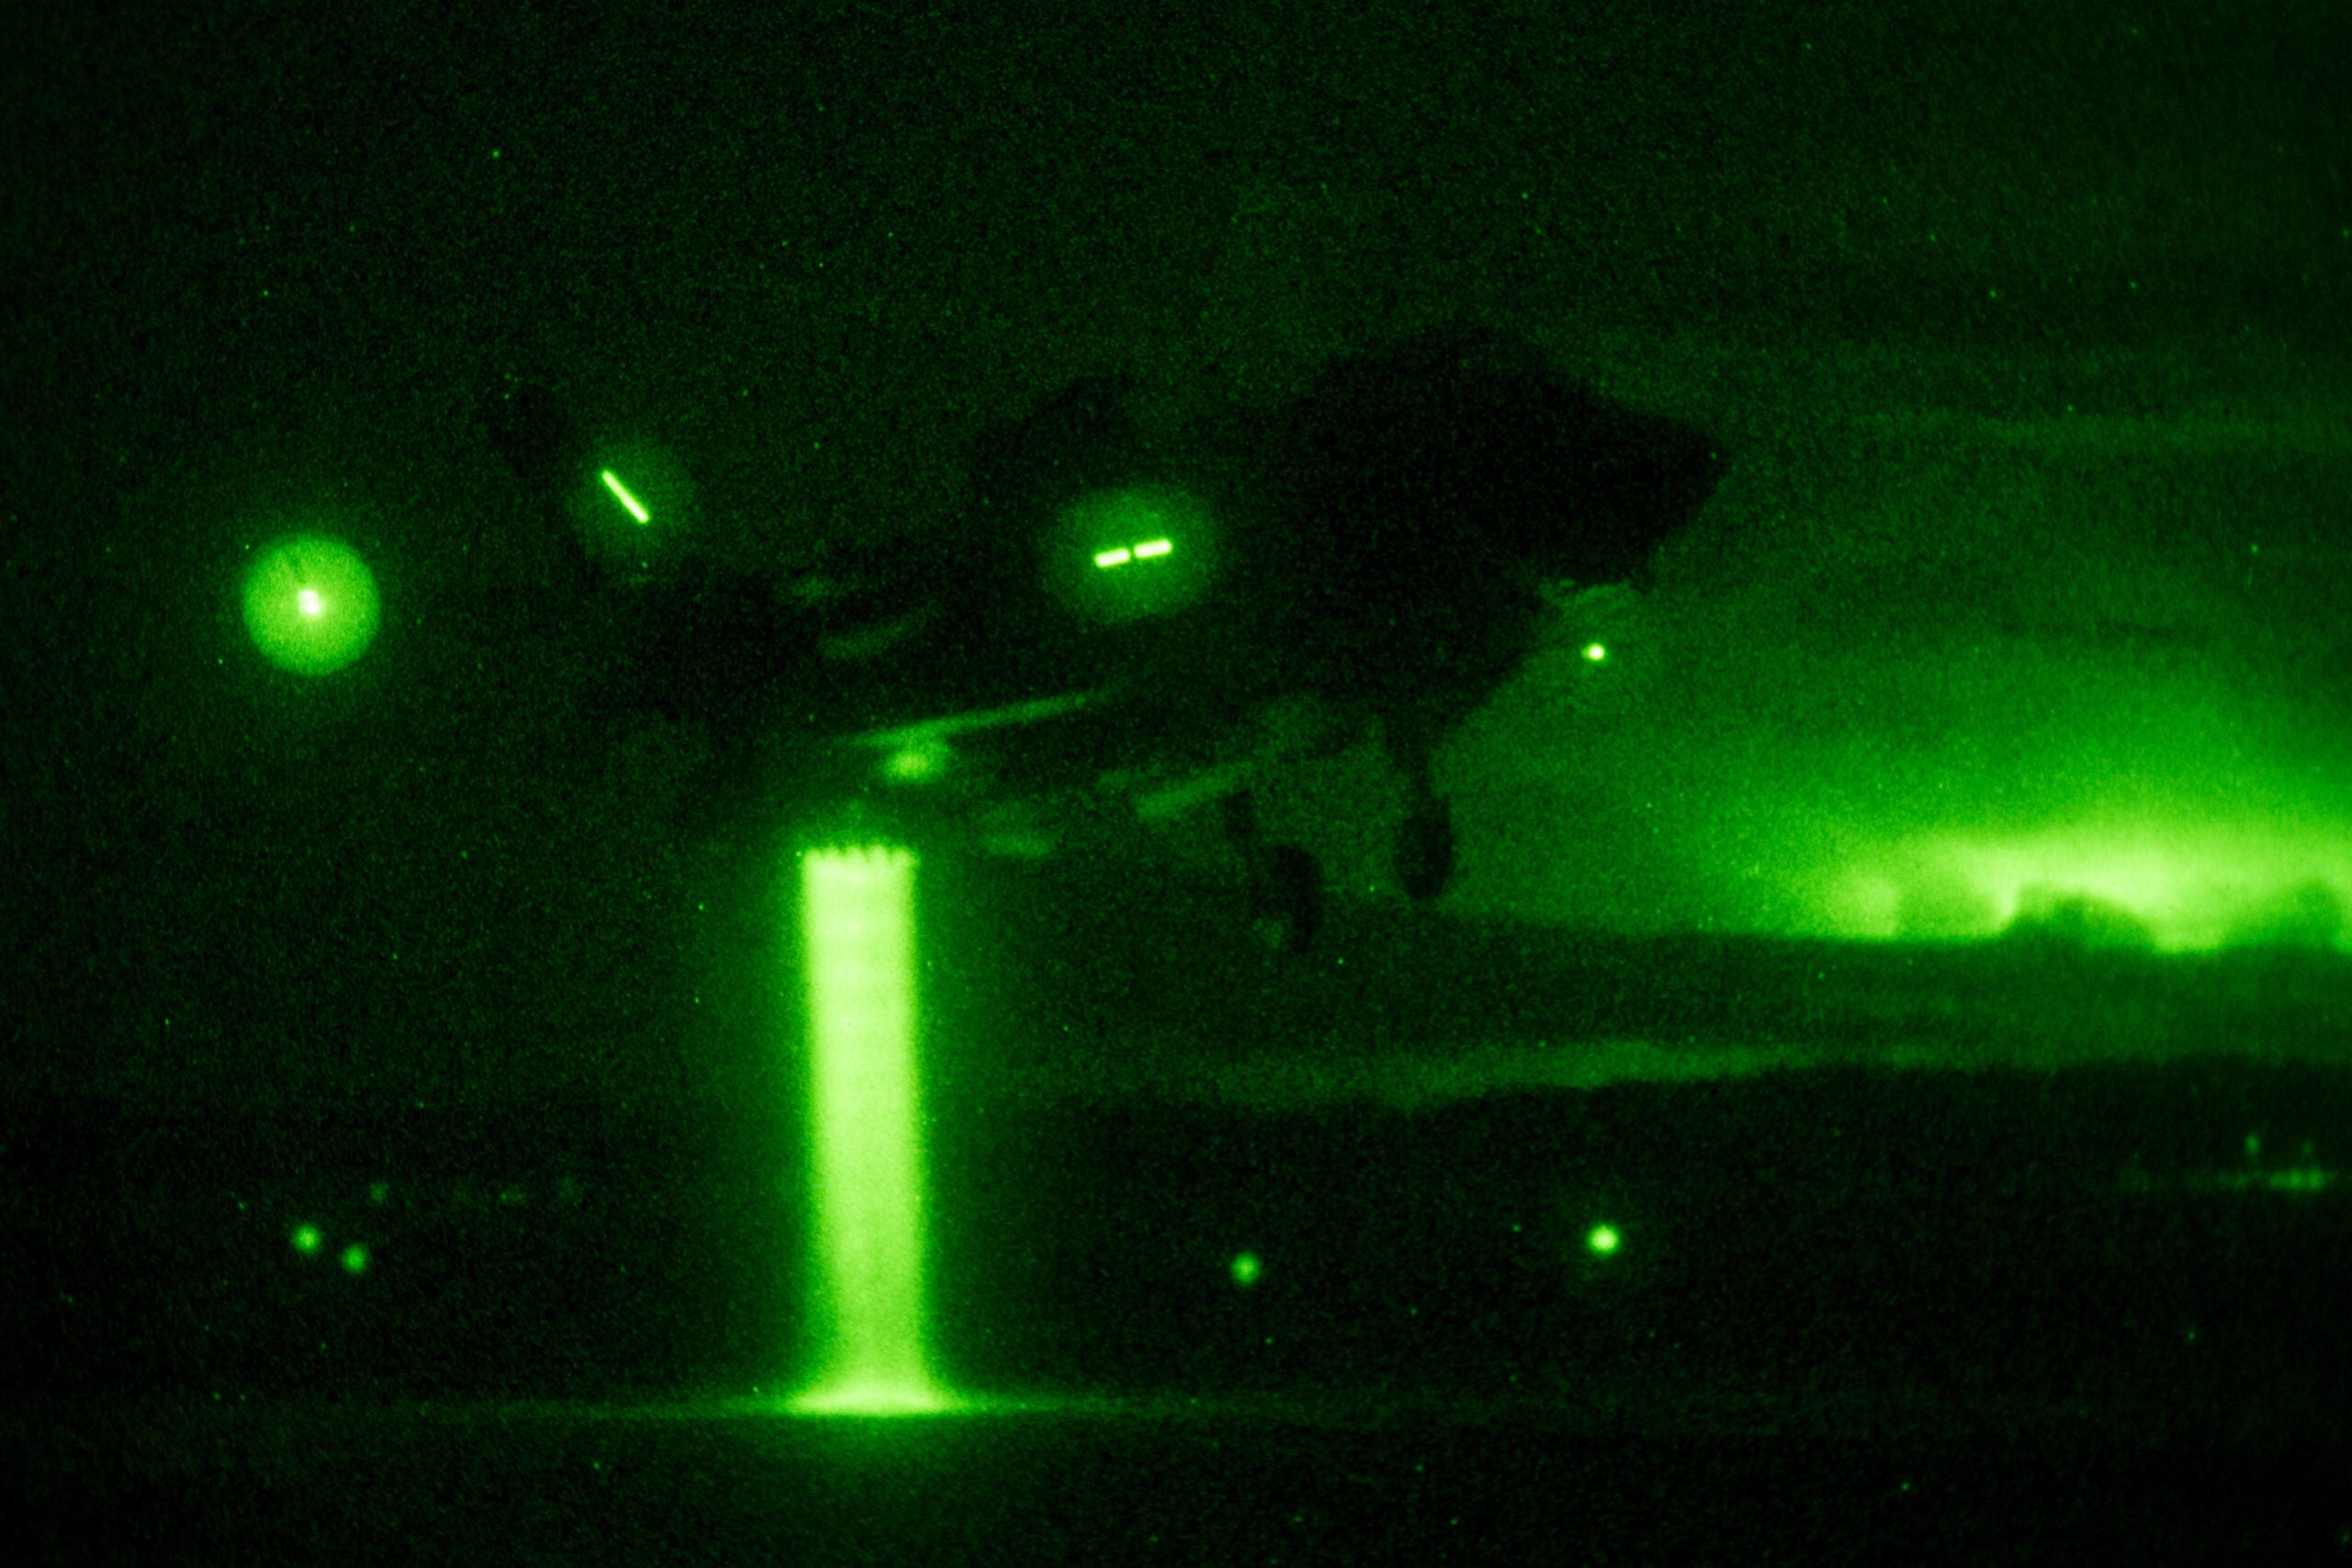 U.S. Marine Corps Maj. Michael Lippert and Peter Wilson, F-35 test pilots at the Patuxent River Integrated Test Force (ITF), conduct night field carrier landing practices Aug. 30, 2018, at NAS Patuxent River in preparation for the First of Class Flight Trials (Fixed Wing) on HMS Queen Elizabeth.

During two FOCFT (FW) phases, held back-to-back this fall, the Pax River ITF team plans to perform a variety of flight maneuvers and deck operations to develop the F-35B operating envelope on United Kingdom’s Queen Elizabeth Class carriers. A third FOCFT (FW) phase followed by operational testing is scheduled for 2019. Together, the tests will help the U.K. Ministry of Defence reach F-35B initial operating capability (maritime) in 2020.